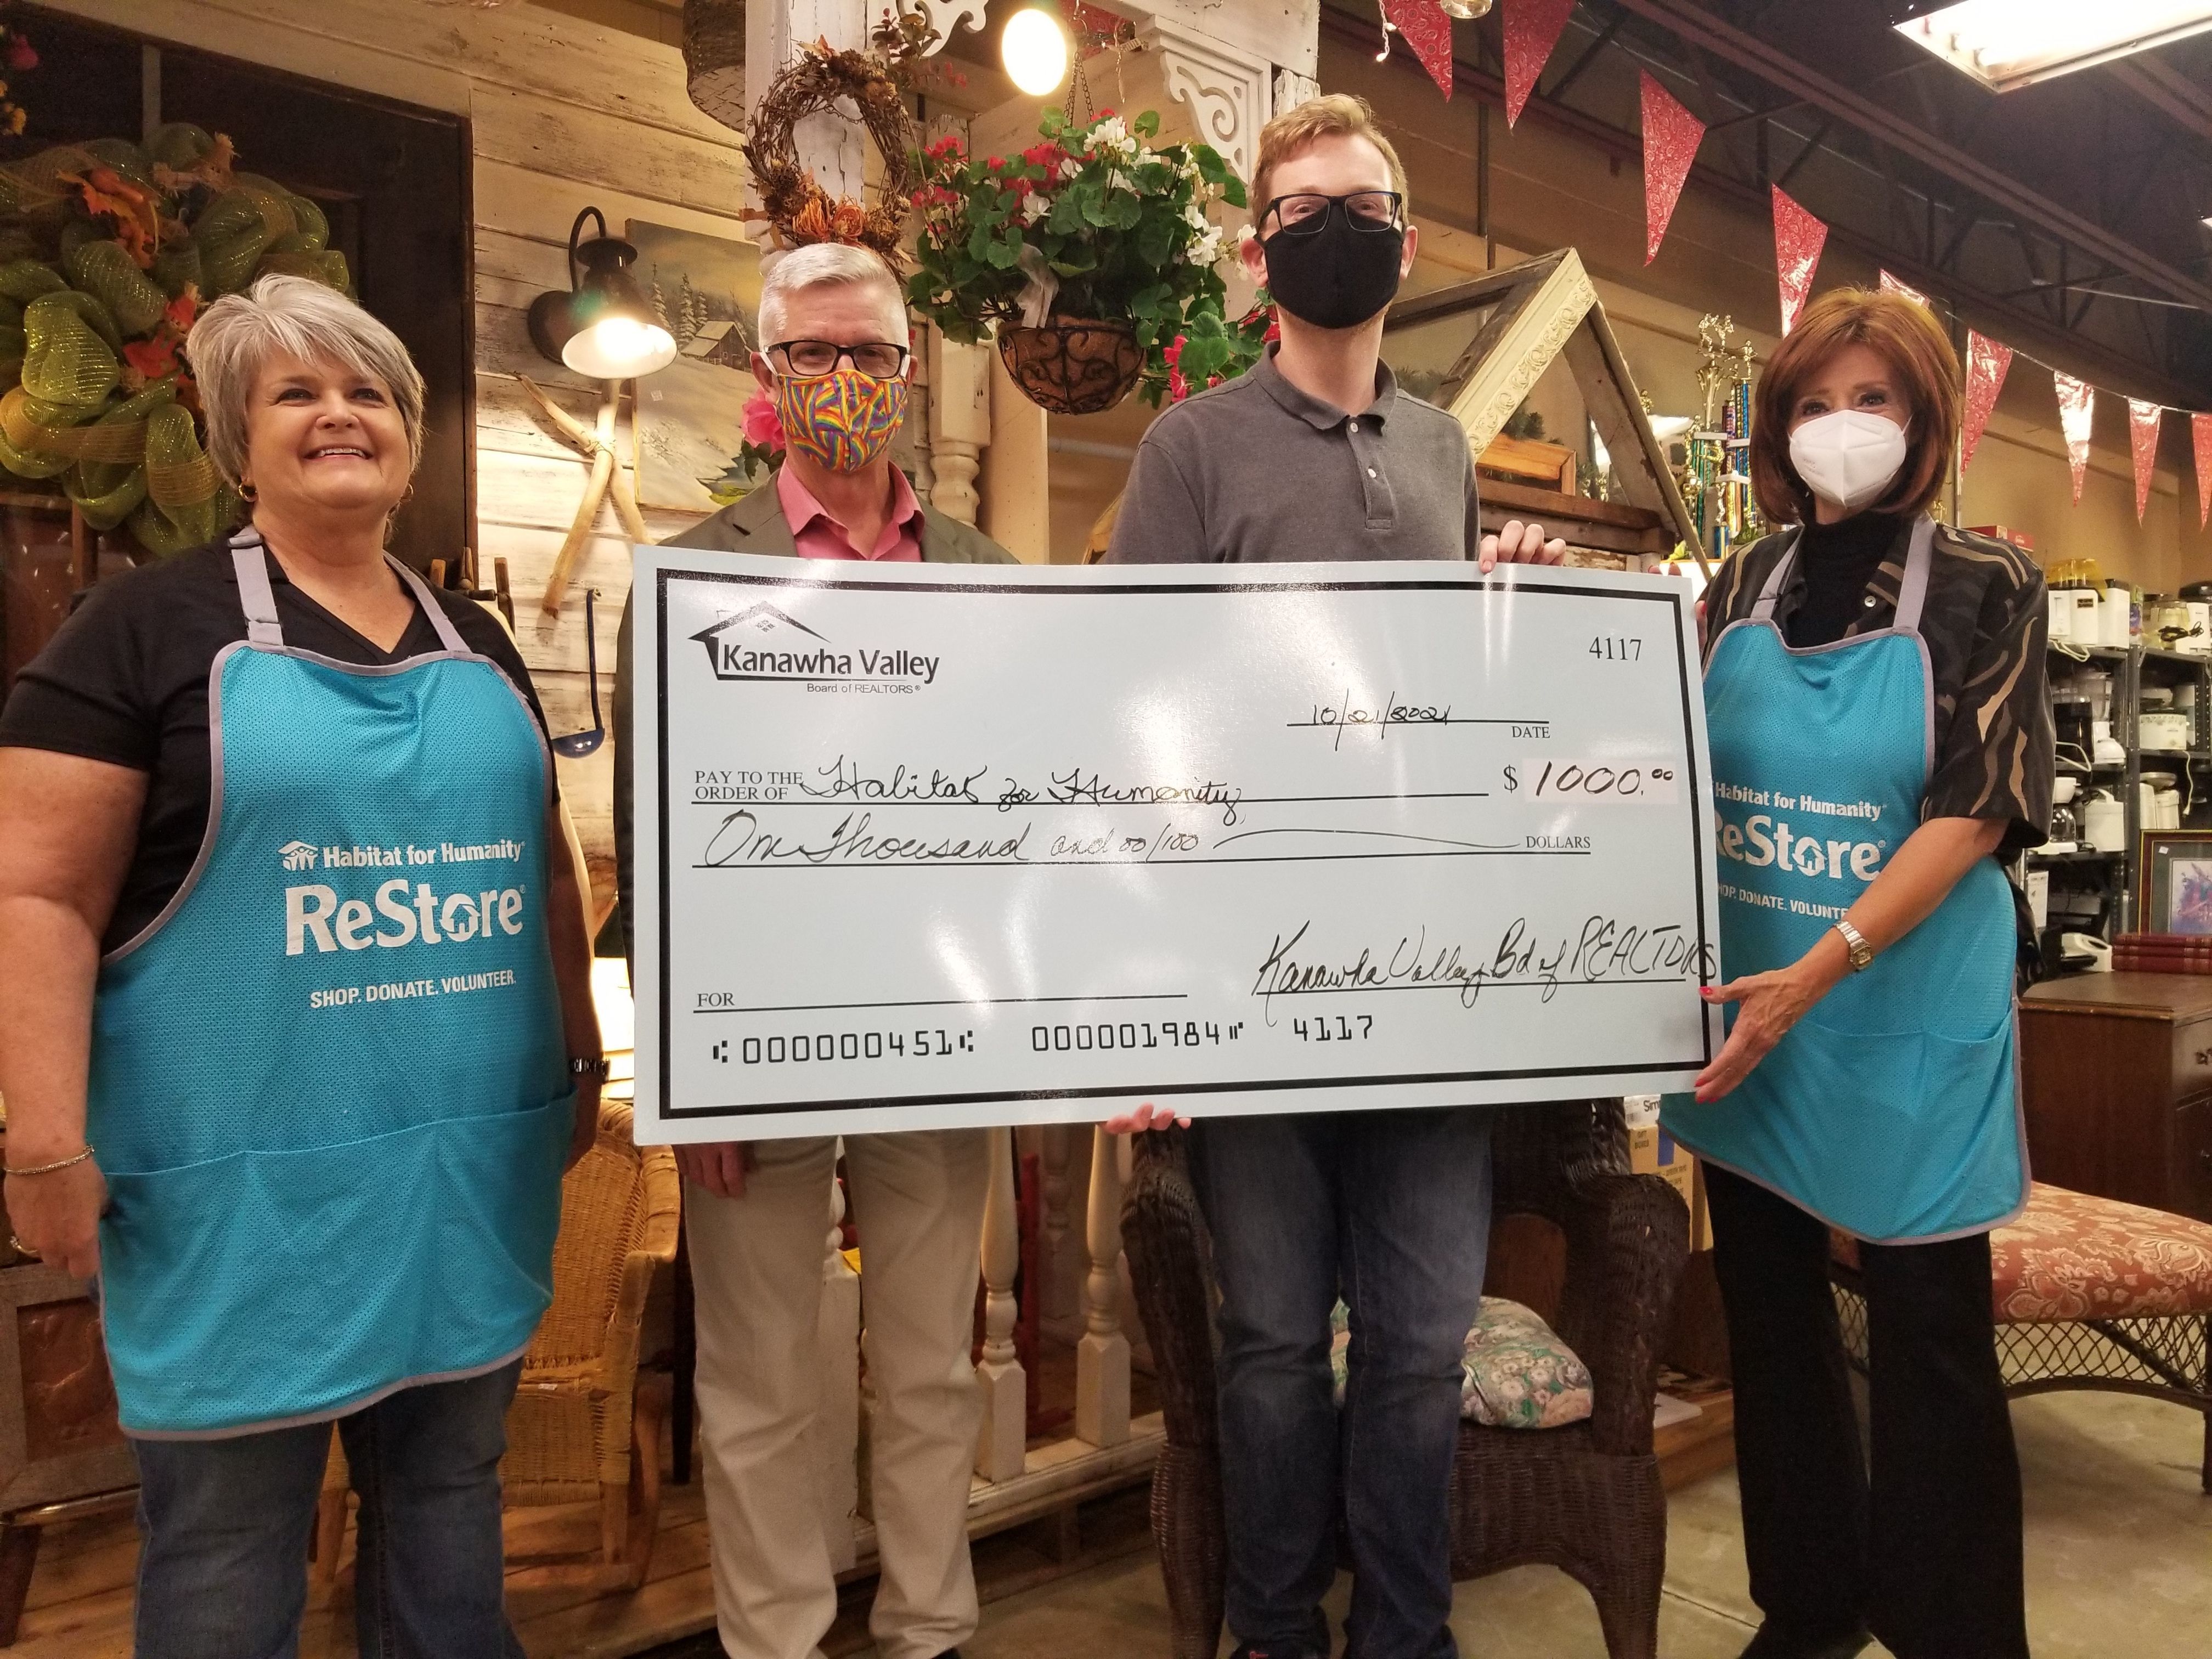 Members of the Board present Habitat’s executive director, Dr. Andrew Blackwood, with a check for $1,000 that will be used to purchase new building materials.